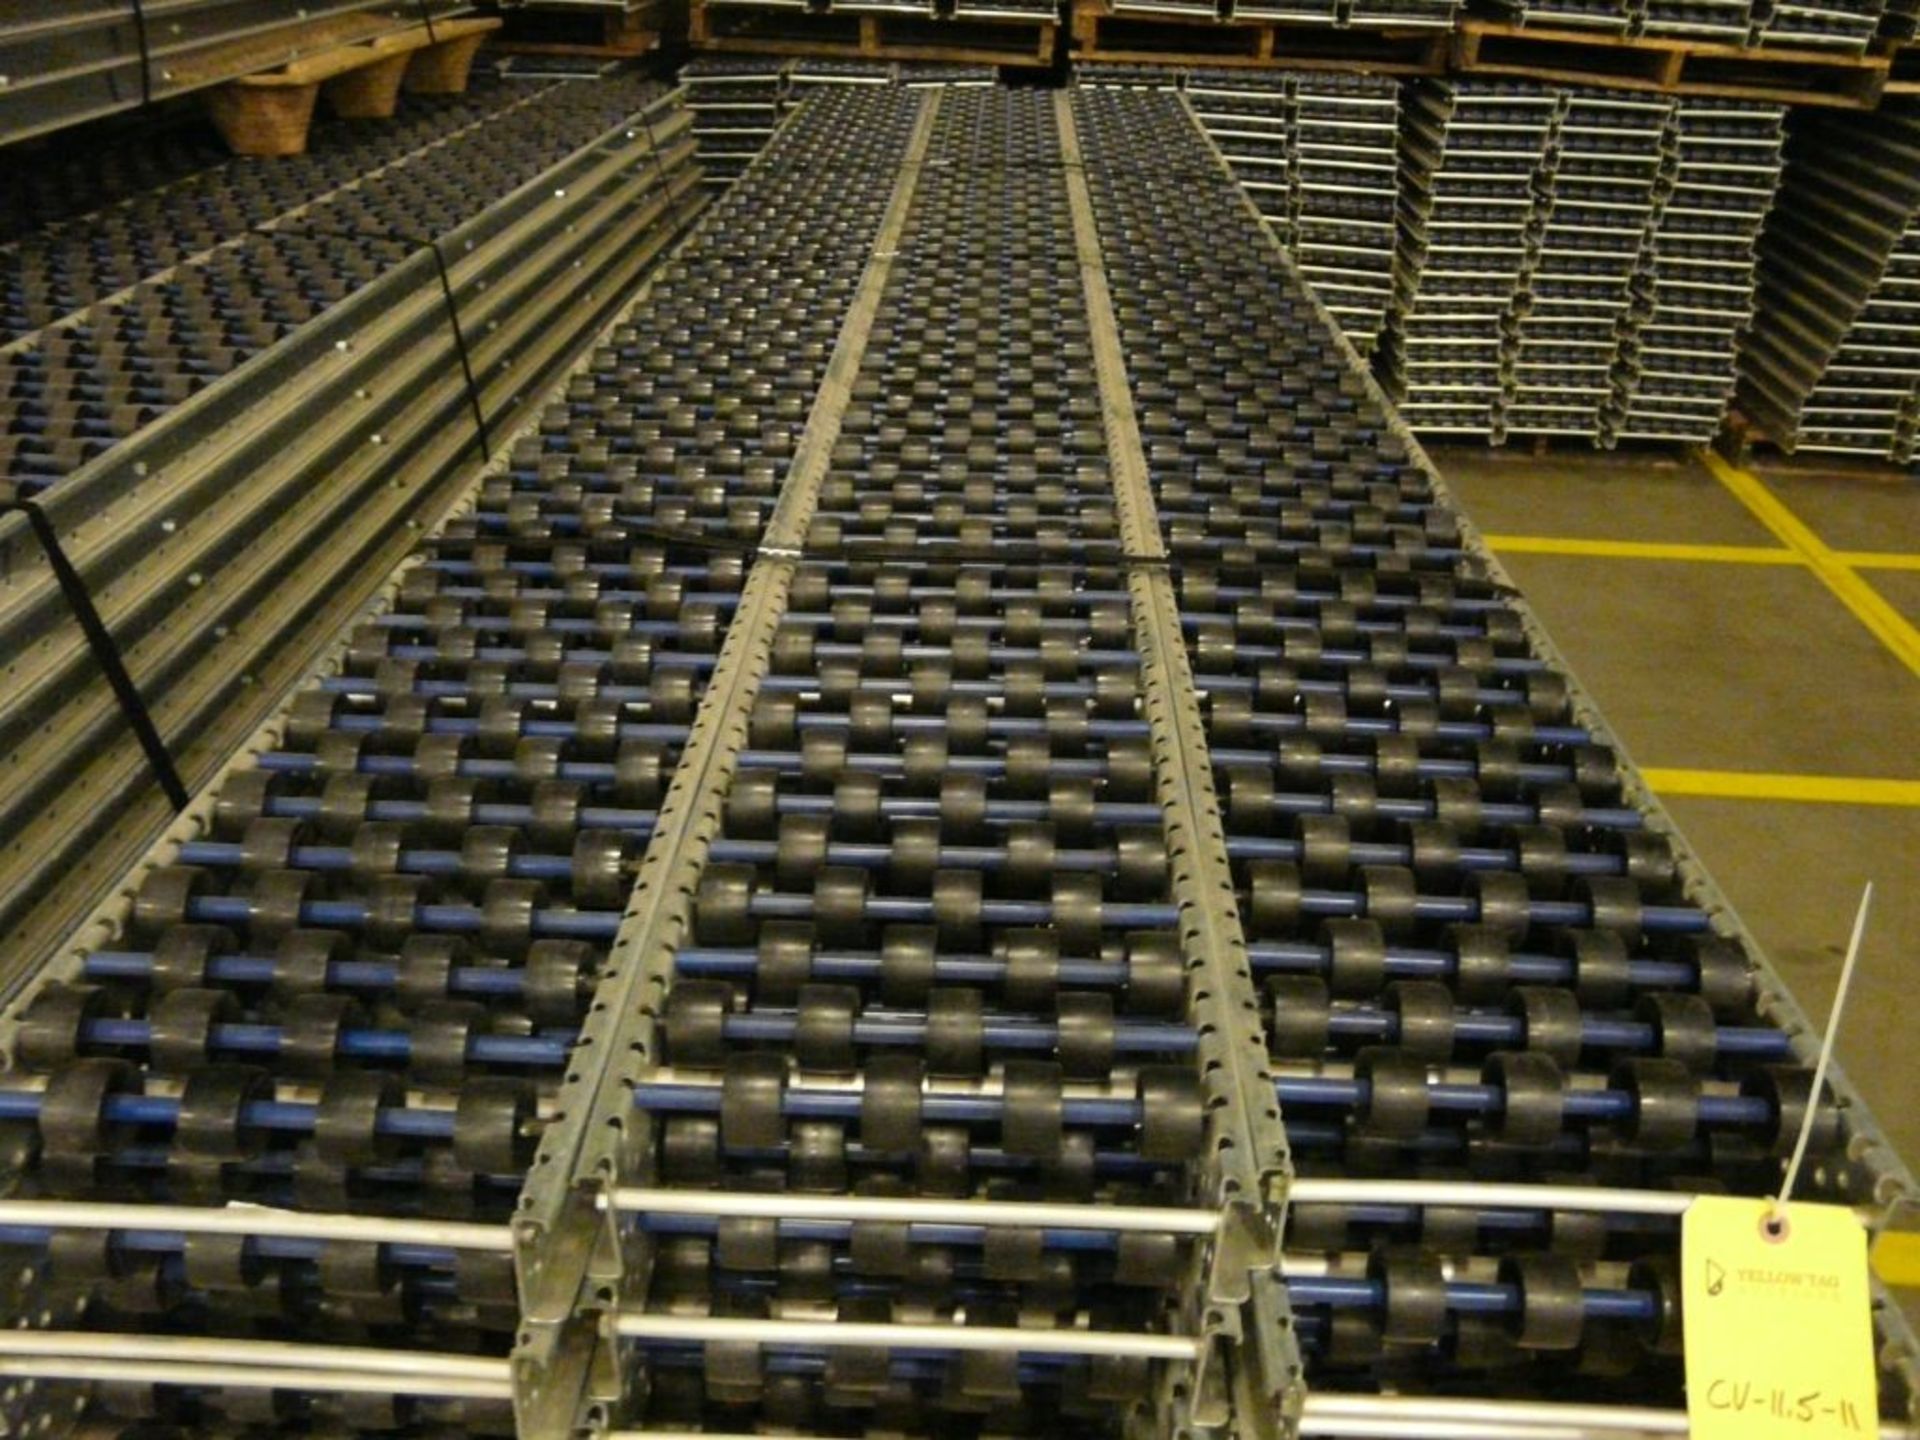 Lot of (90) SpanTrack Wheelbed Carton Flow Conveyors - 11.5'L x 11"W; Tag: 224197 - $30 Lot - Image 3 of 4